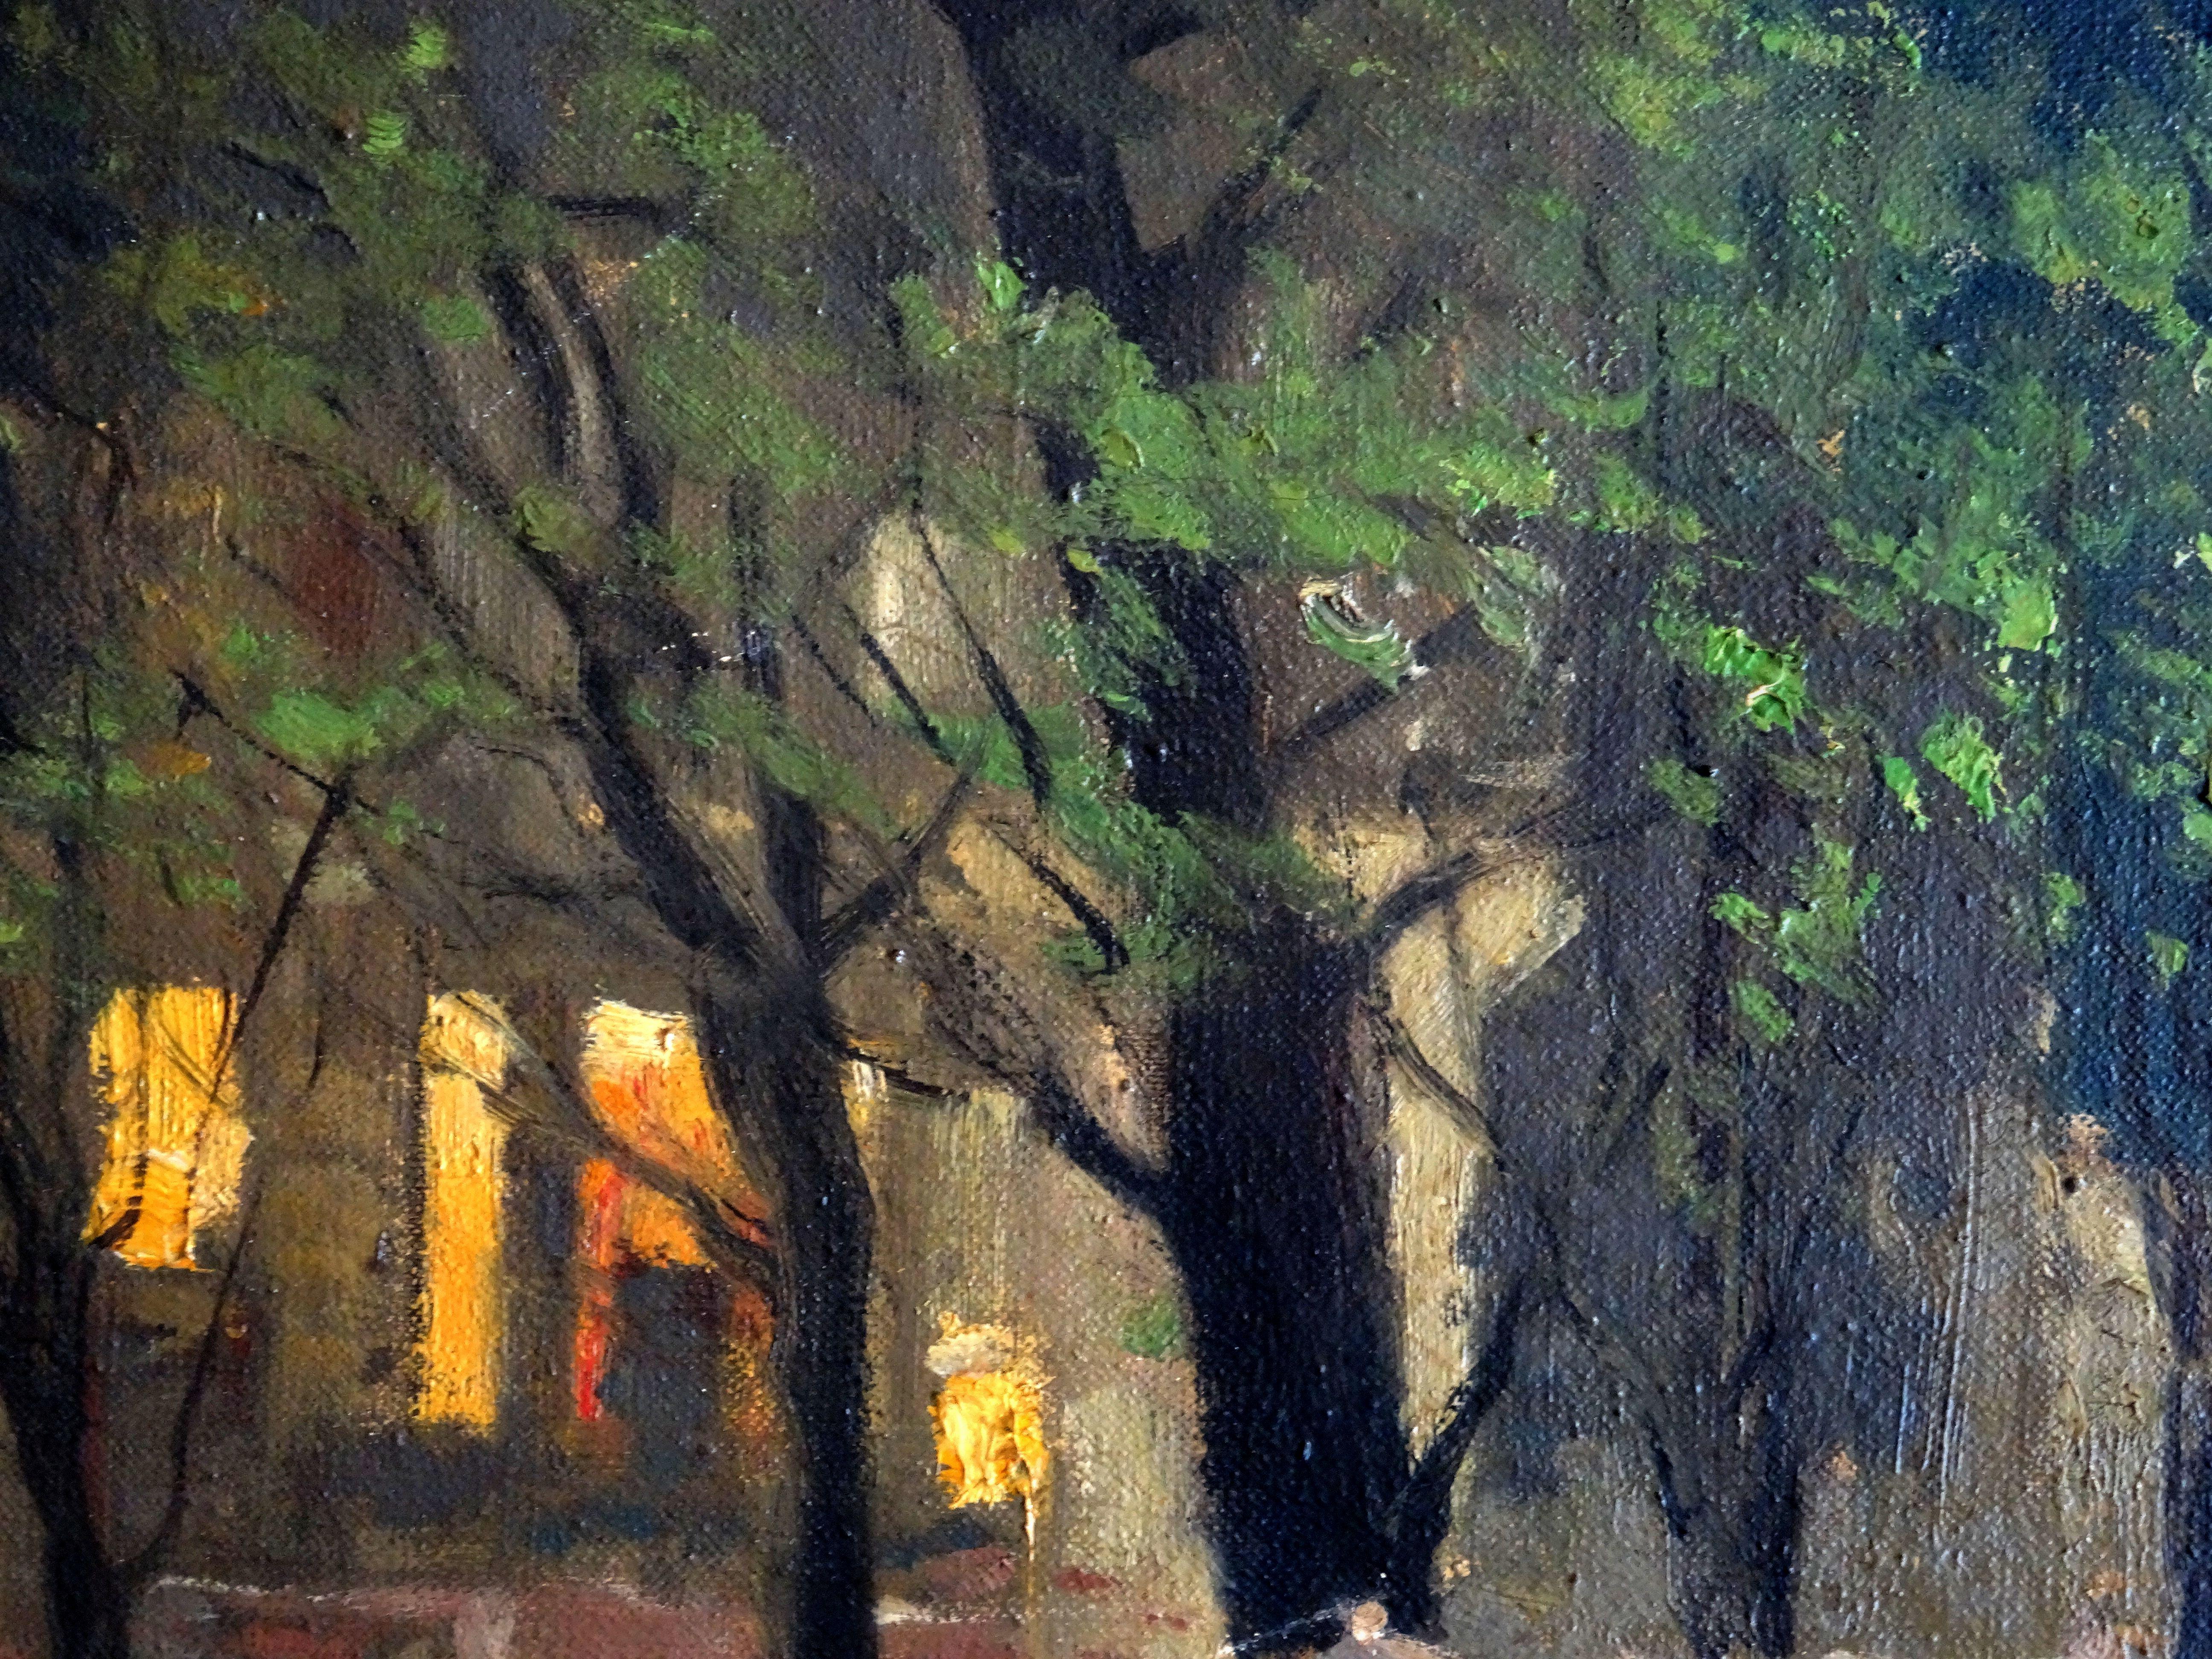 Restaurant terrace at evening in Montmartre, Paris. Oil on canvas, 46x38 cm - Impressionist Painting by Serge Kislakoff